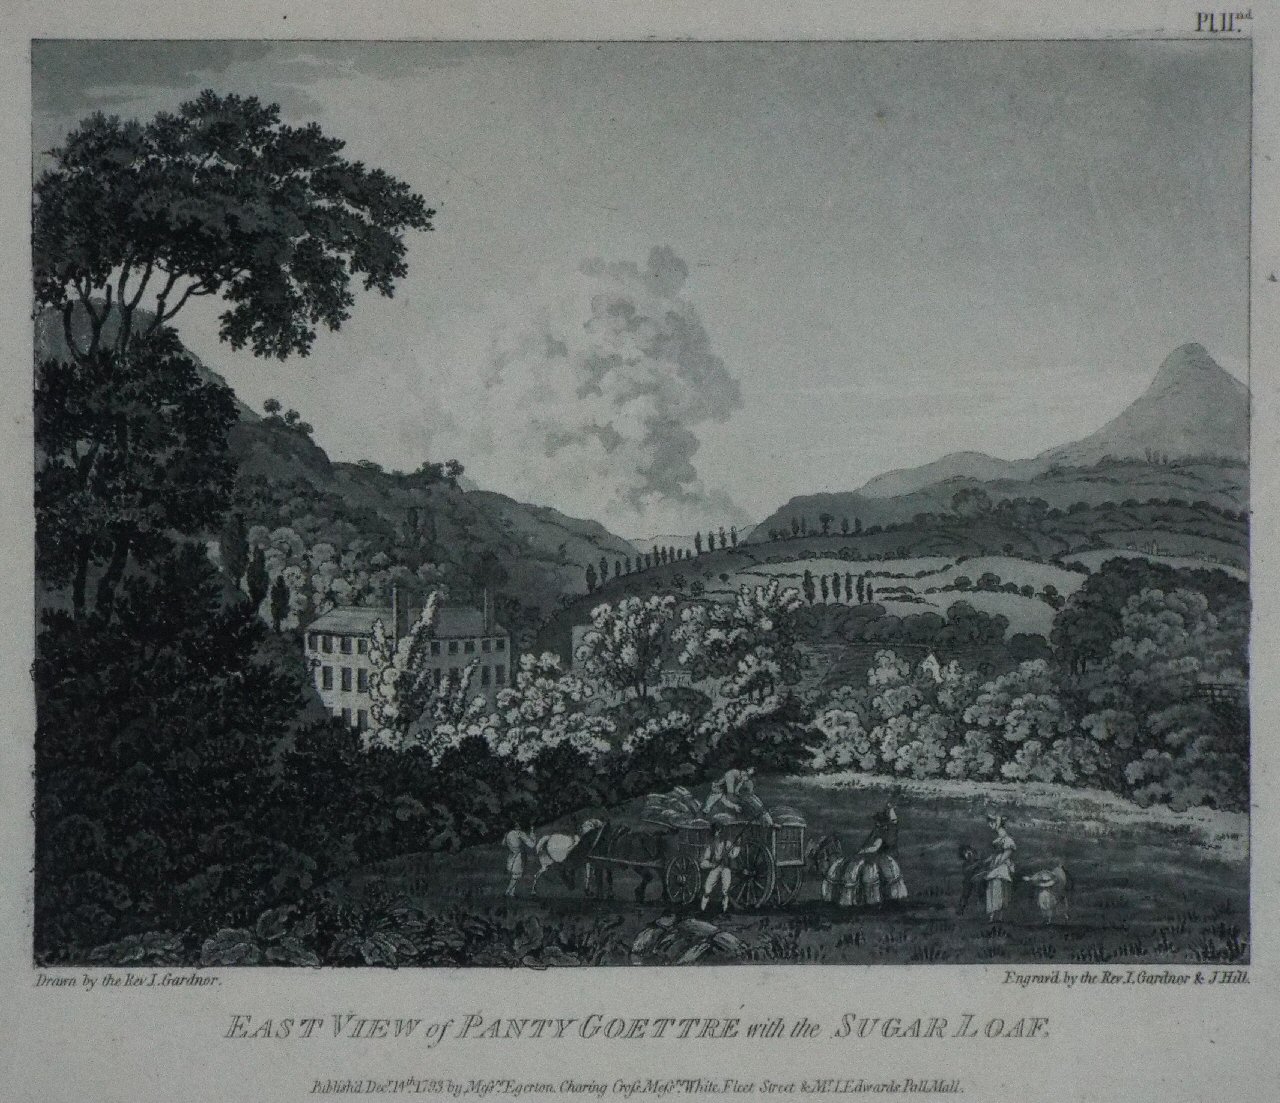 Aquatint - East View of Panty Goettre with the Sugar Loaf. - Gardner